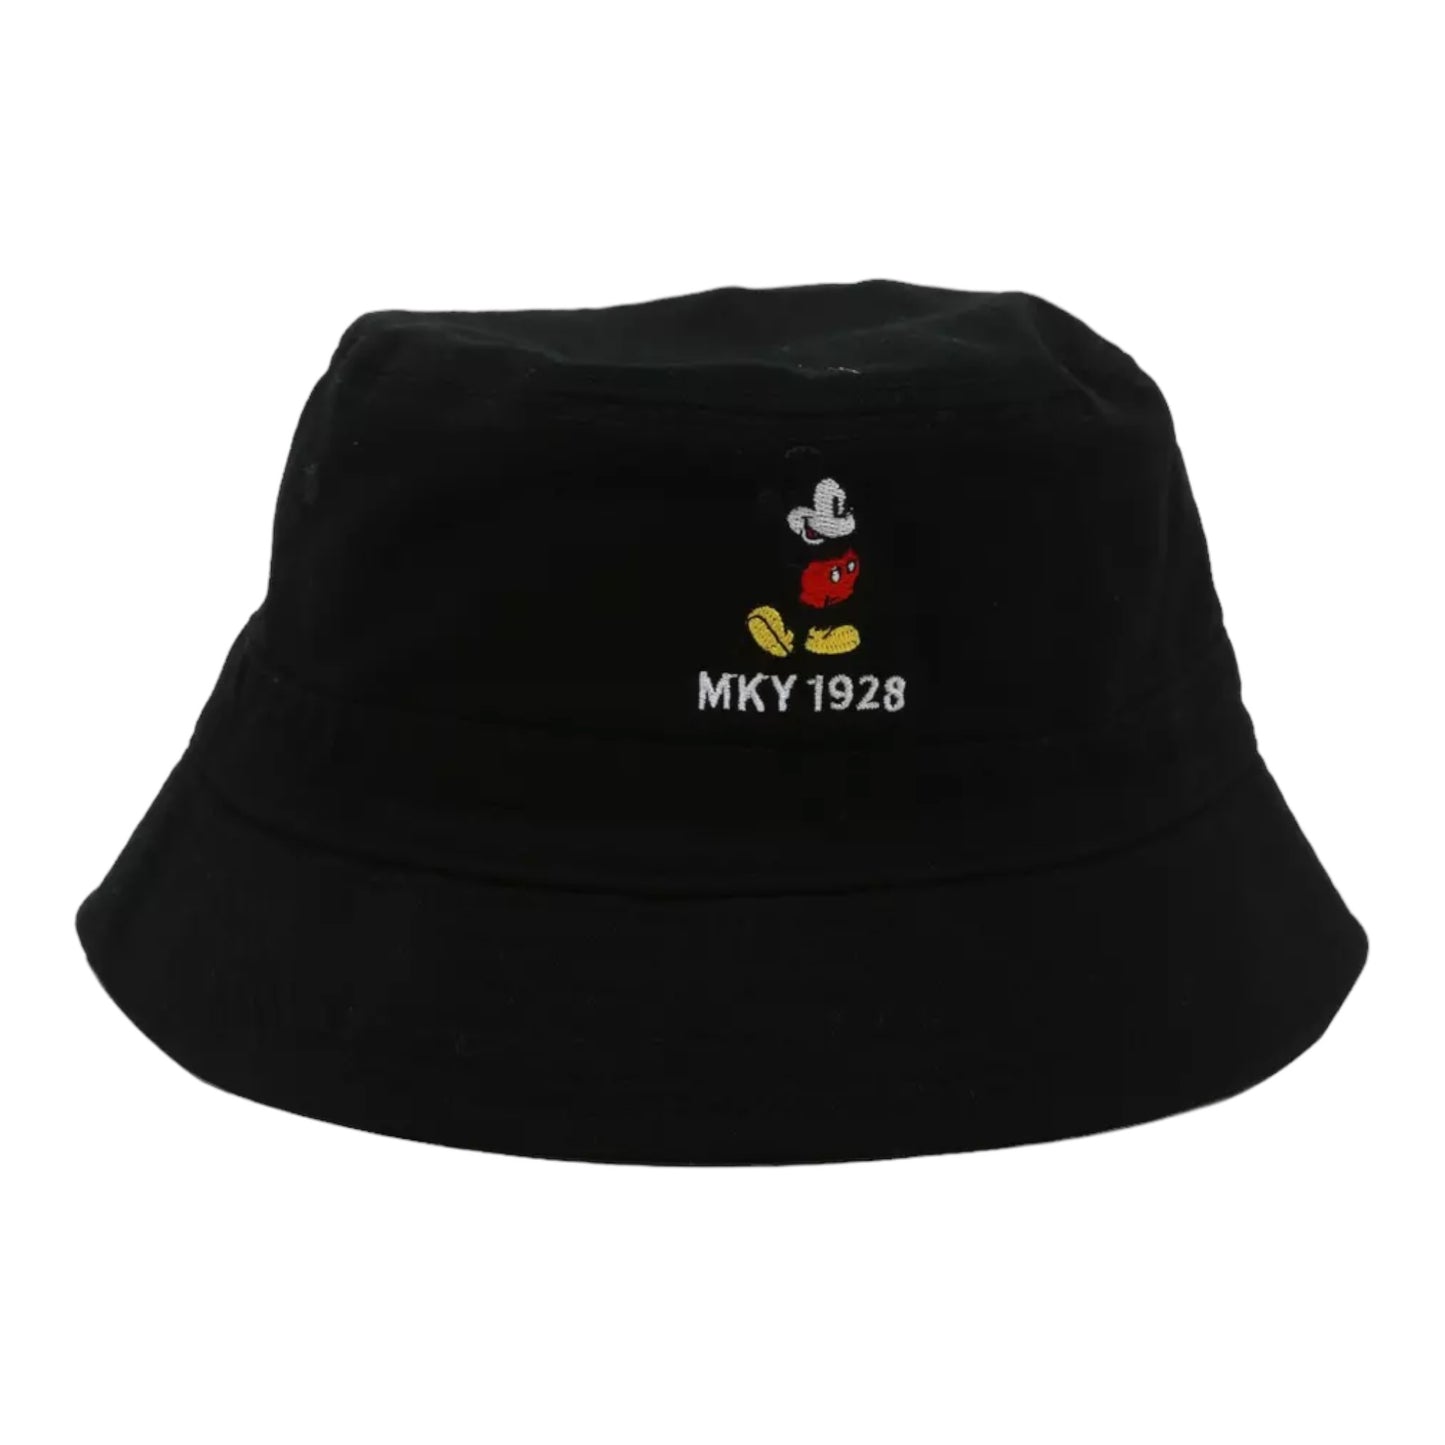 DISNEY MICKEY MOUSE MKY 1928 BUCKET HAT UPD1275 BR100